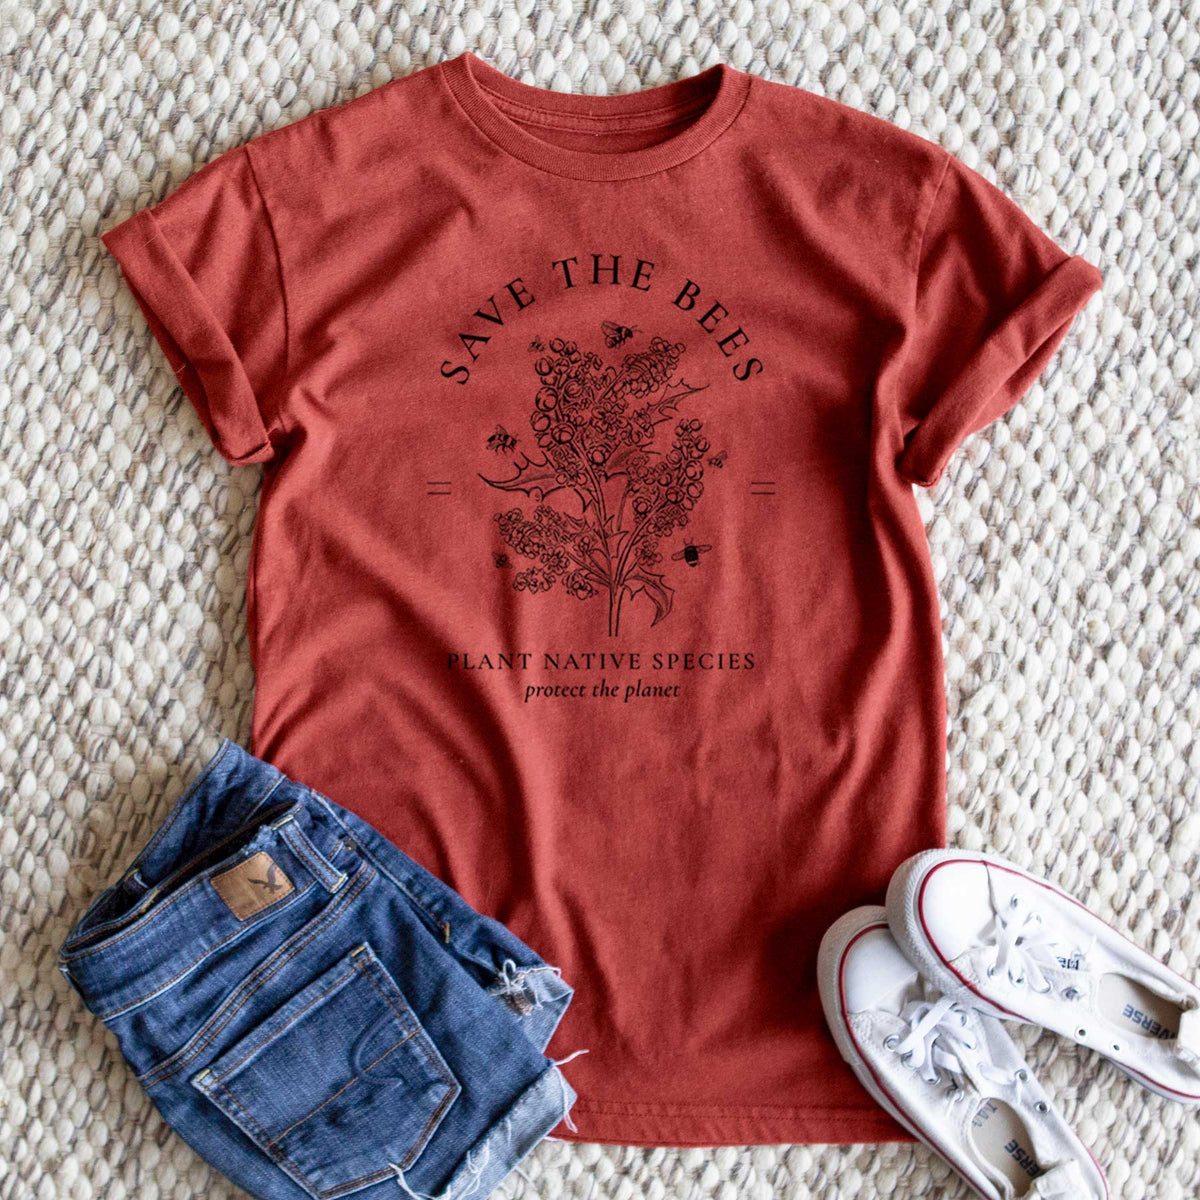 Save the Bees - Plant Native Species - Unisex Recycled Eco Tee  - CLOSEOUT - FINAL SALE